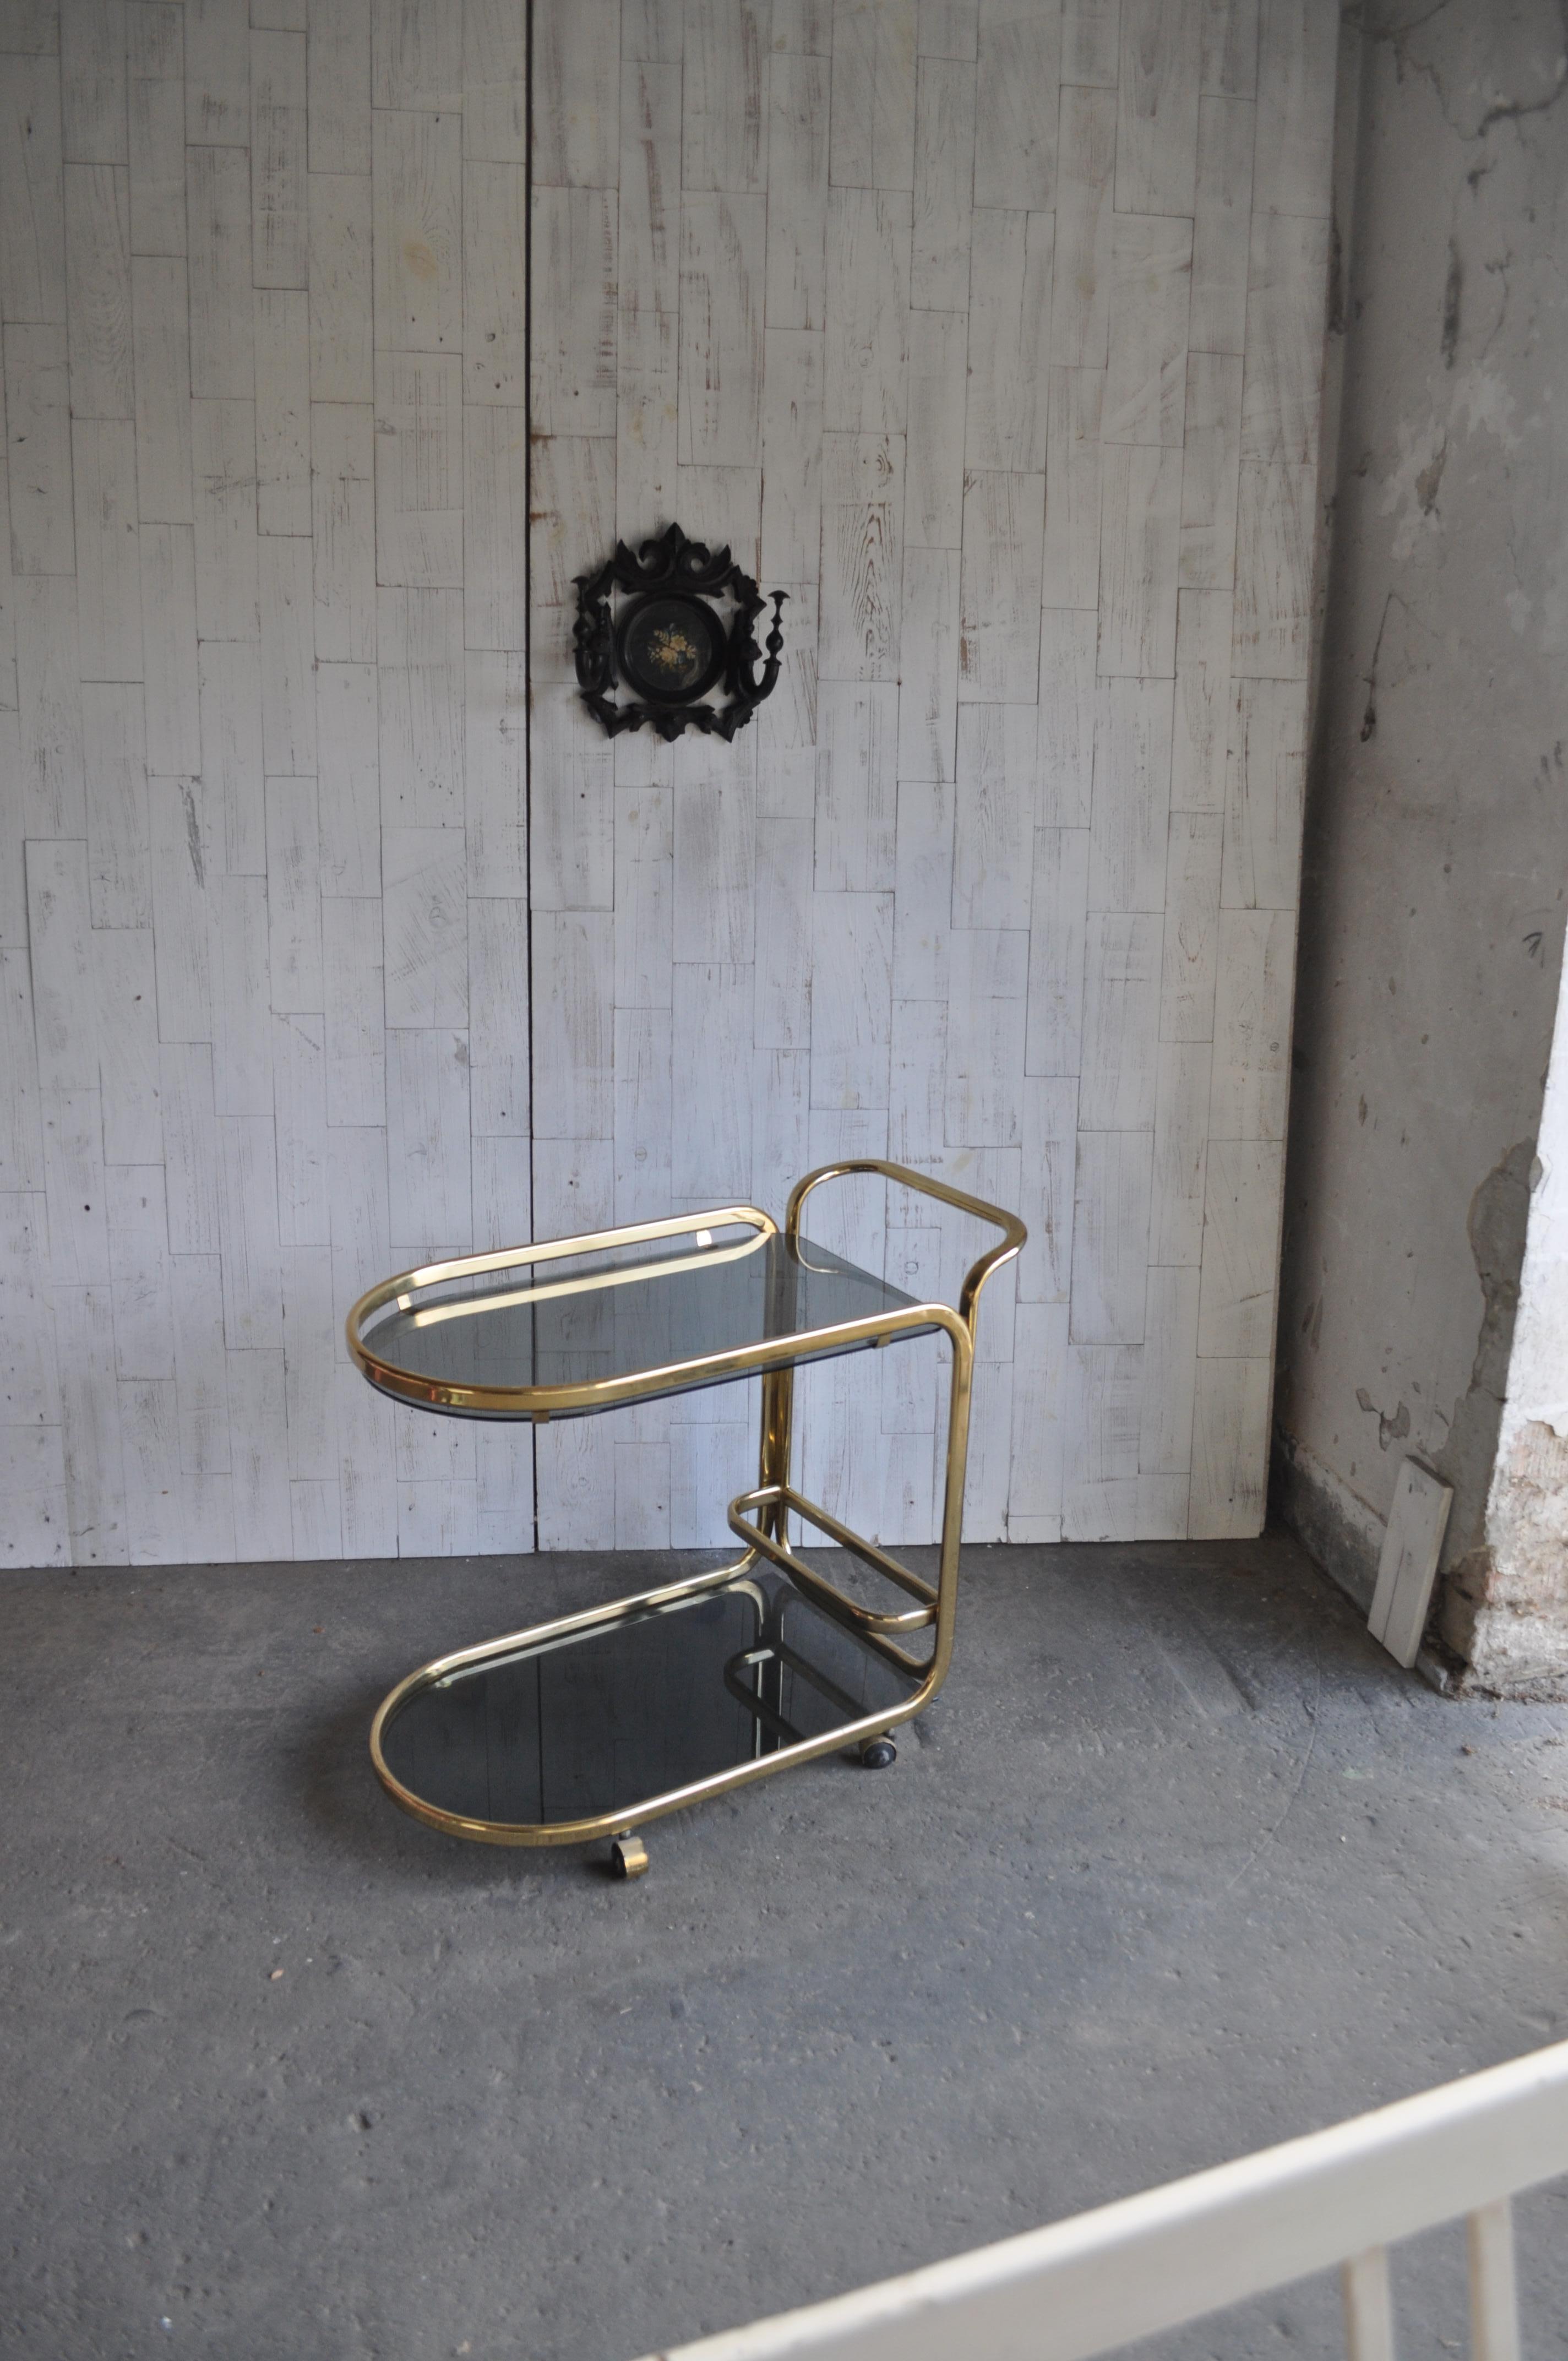 This 1960s Vintage French Regency-style tea cart a brass frame. The brass frame features two levels. The top level features a glass shelf with a bar around the top with a handle to push the cart. The cart is finished with round caster wheels for